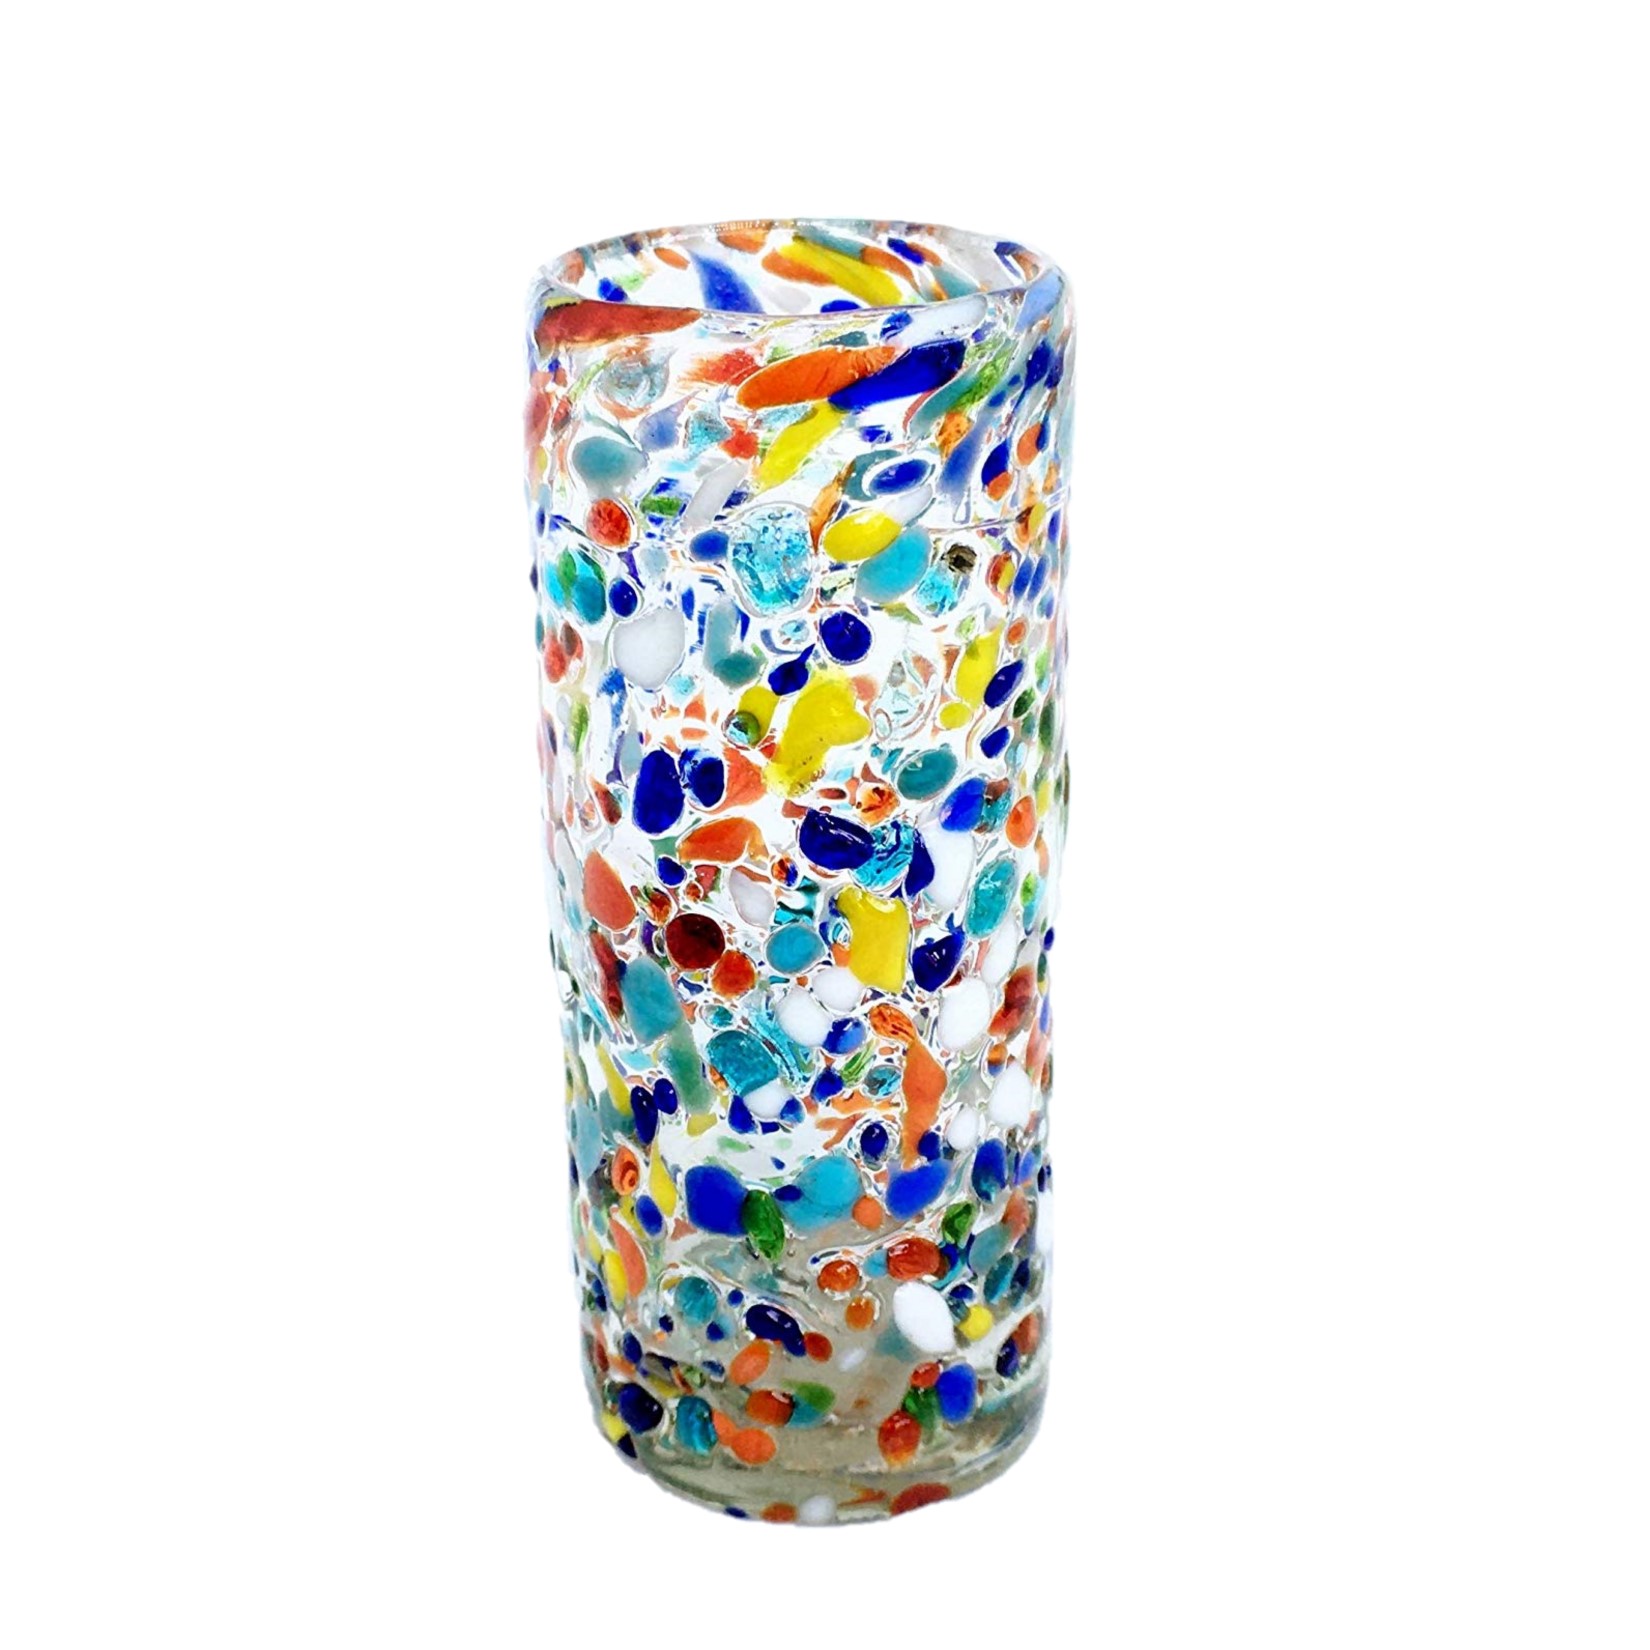 New Items / Confetti Rocks 2 oz Tequila Shot Glasses (set of 6) / Sip your favorite Tequila or Mezcal with these iconic Confetti Rocks shot glasses, which are a must-have of any bar. Crafted one by one by skilled artisans in Tonala, Mexico, each glass is different from the next making them unique works of art. They feature our colorful Confetti rocks design with small colored-glass rounded cristals embedded in clear glass that give them a nice feeling and grip. These shot glasses are festive and fun, making them a perfect gift for anyone. Get ready for your next fiesta!!